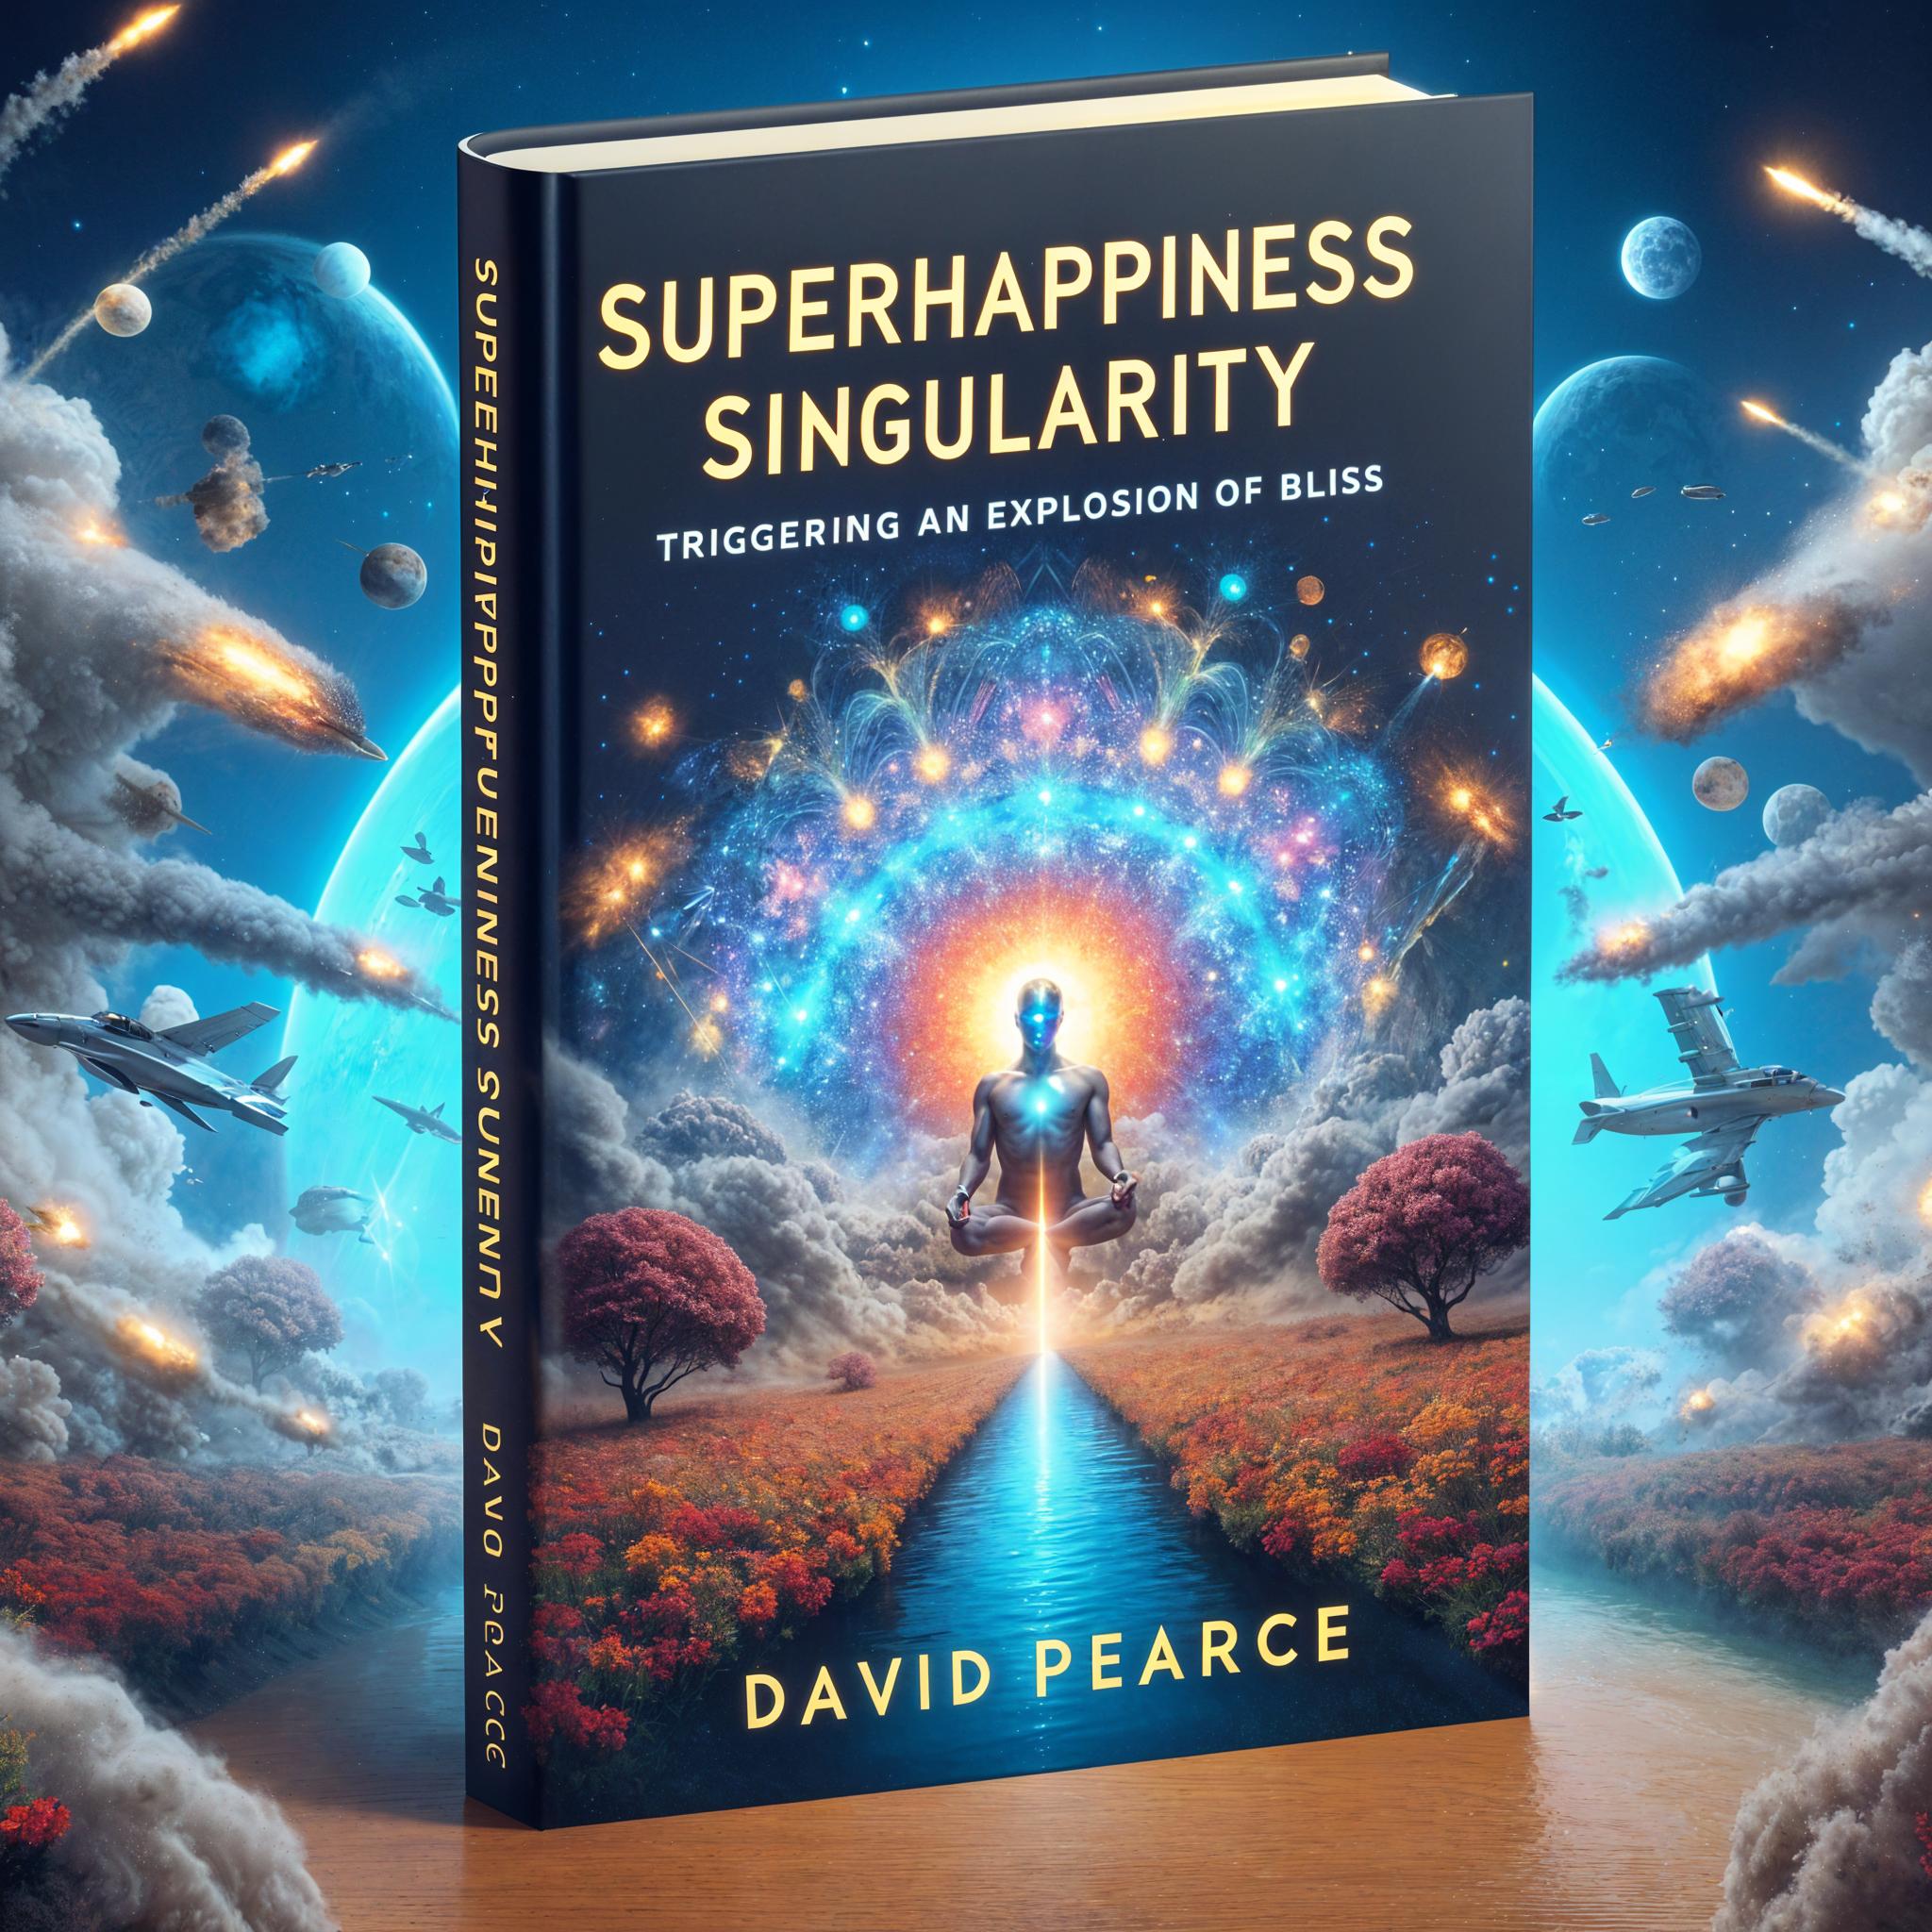 The Superhappiness Singularity by David Pearce